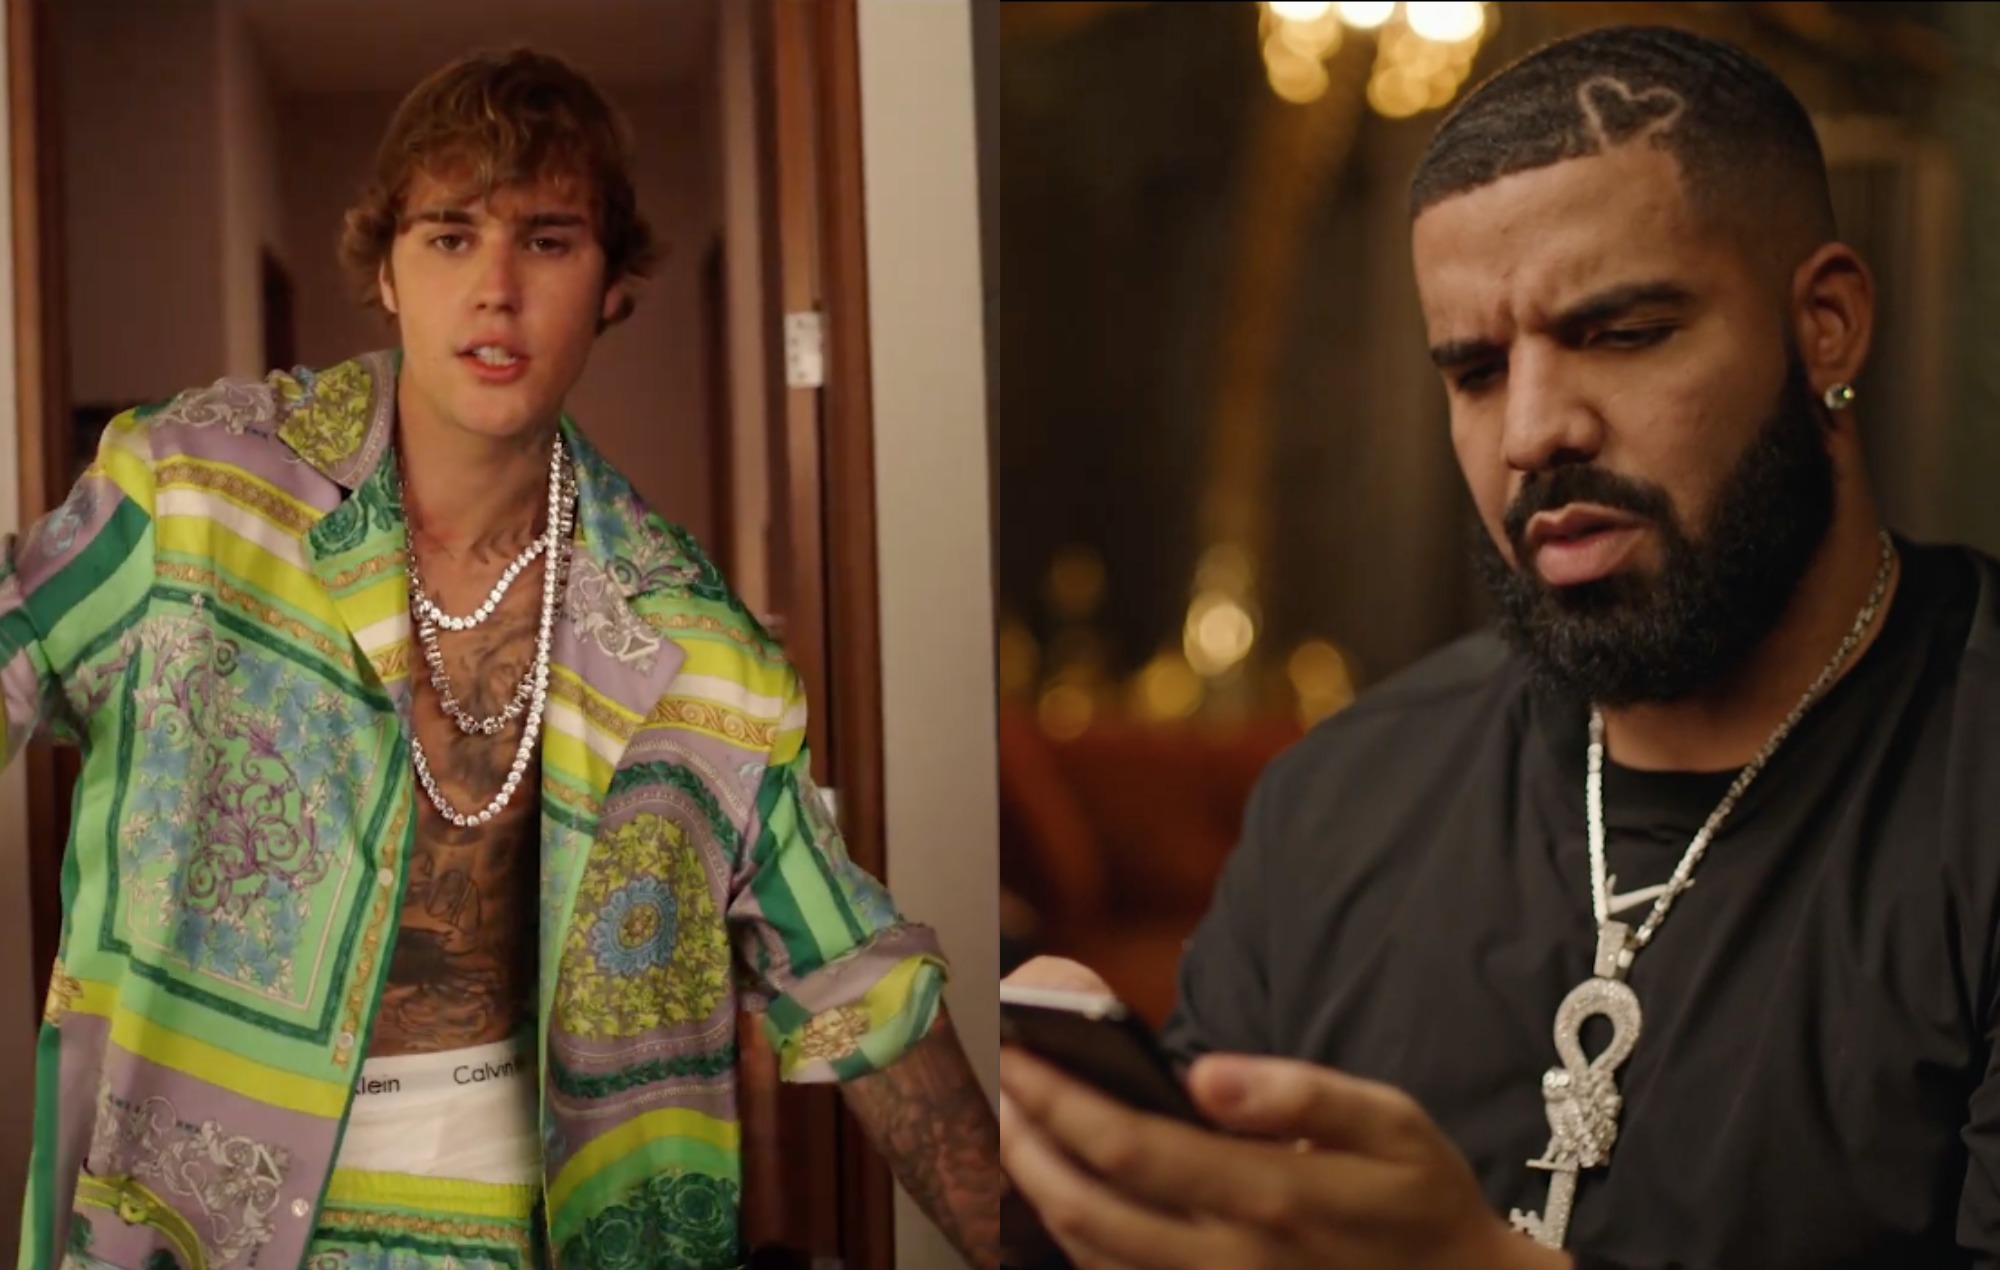 https://www.nme.com/news/music/watch-justin-bieber-step-in-for-drake-in-dj-khaleds-new-popstar-video-2745191